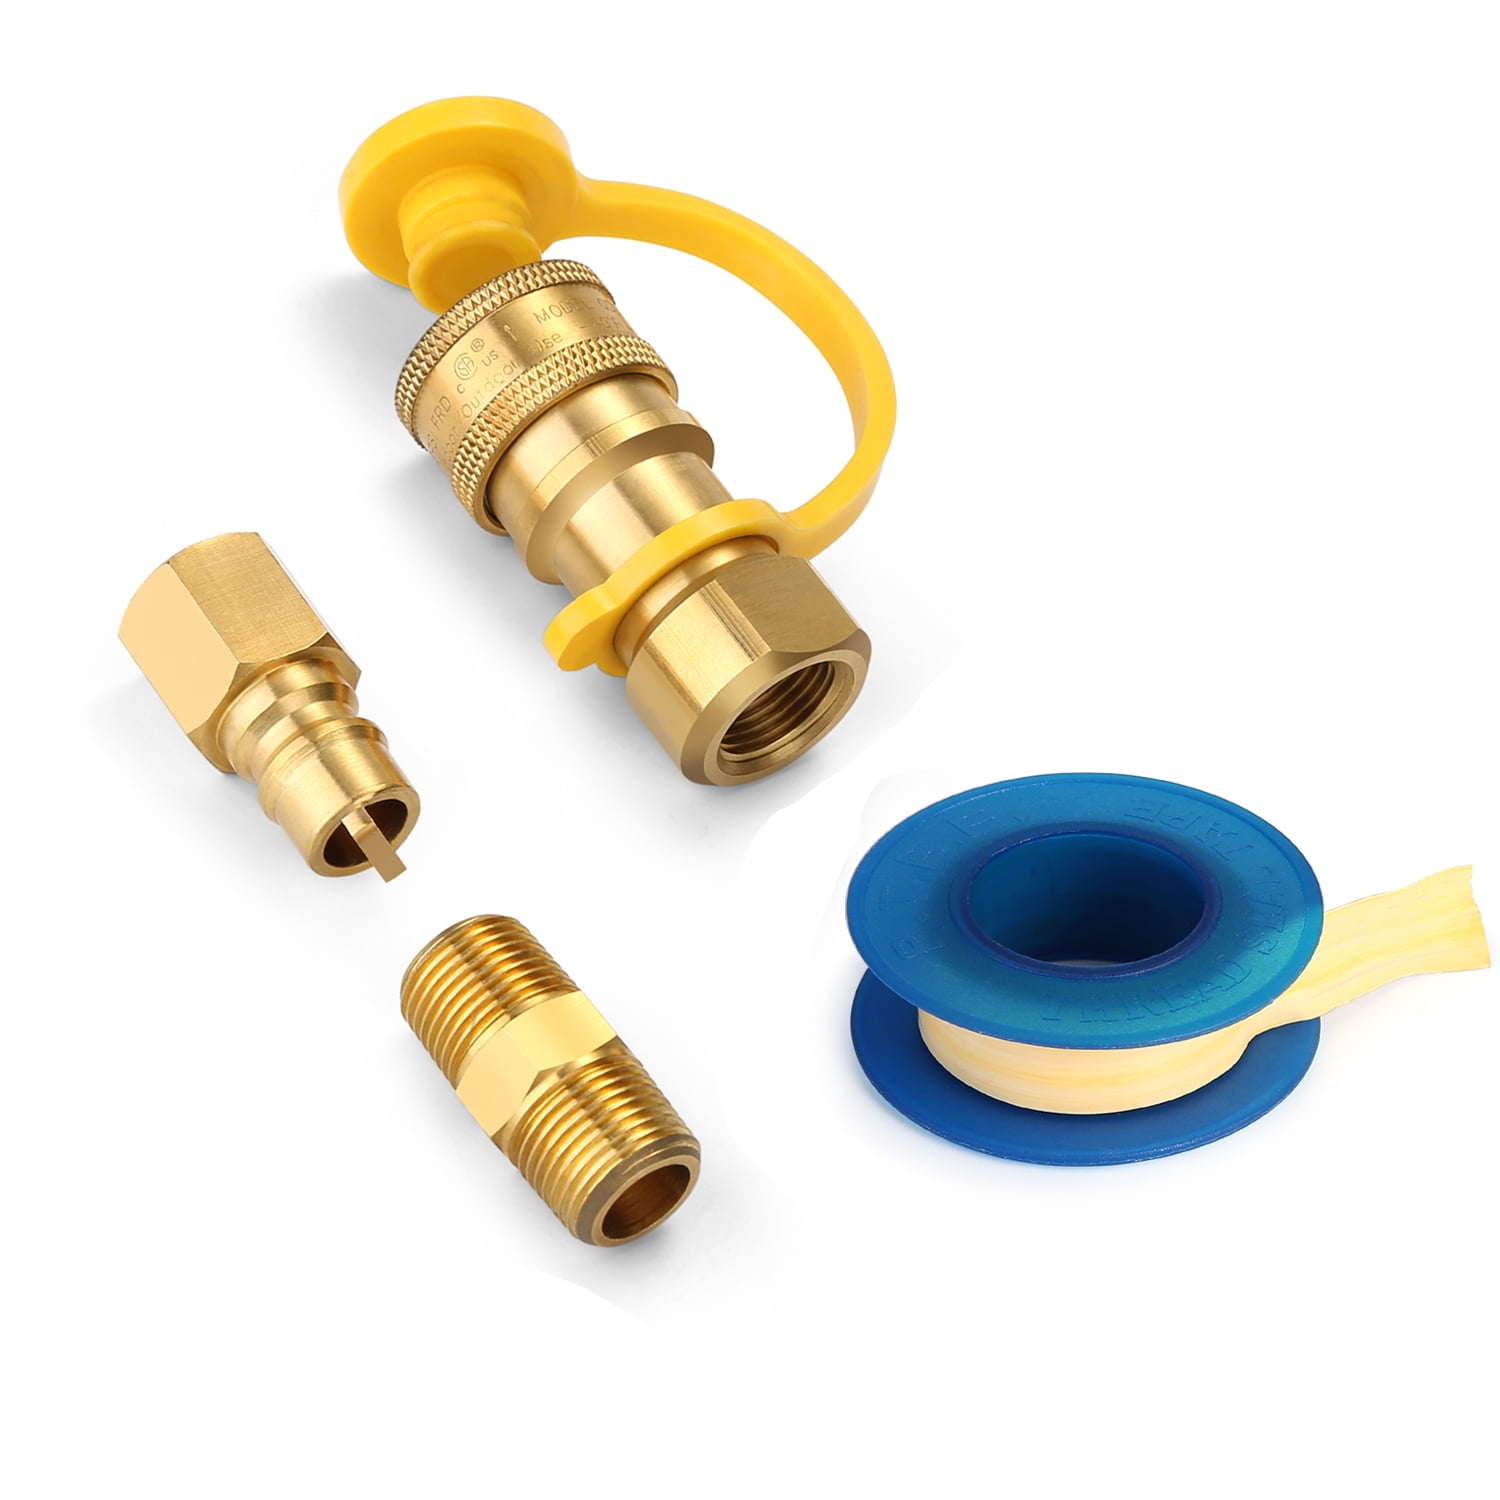 3x Propane Gas Quick Connect Adapter Connector Pipe Fitting 1/4" Male Thread 